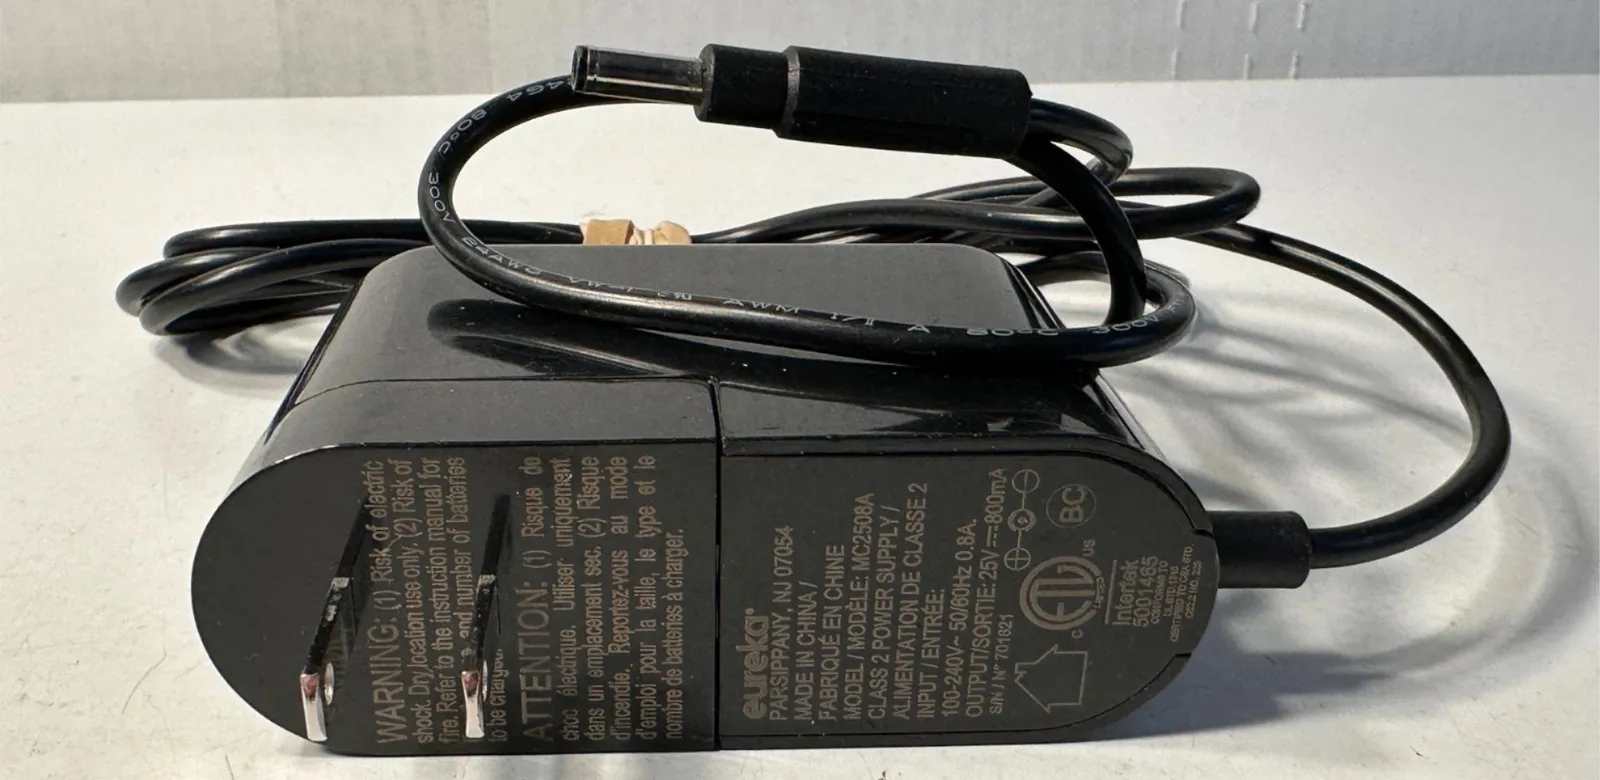 *Brand NEW*Genuine Eureka MC2508A 25V 800mA AC Adapter Vacuum NEC-222 Power Supply Cord Charger